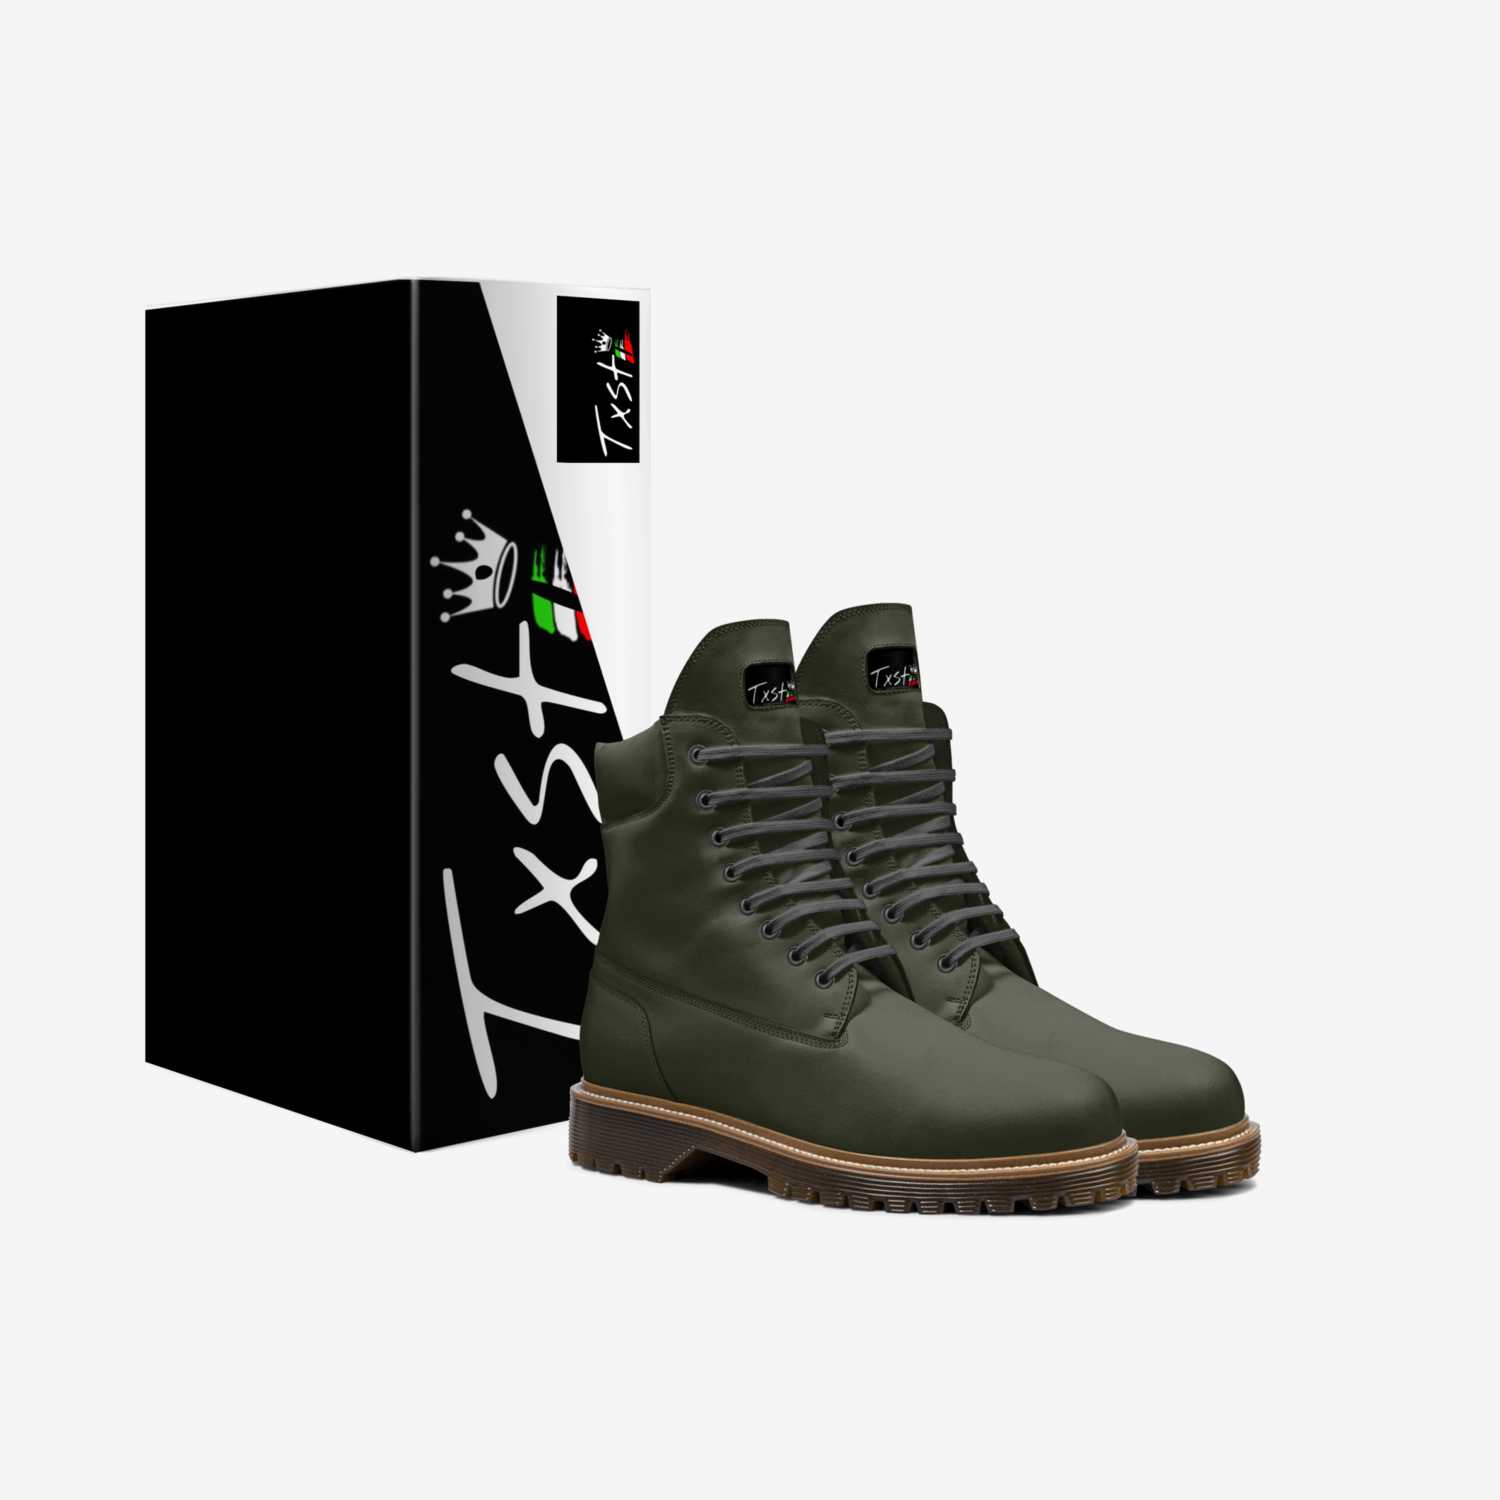 Txsti custom made in Italy shoes by James Tosti | Box view